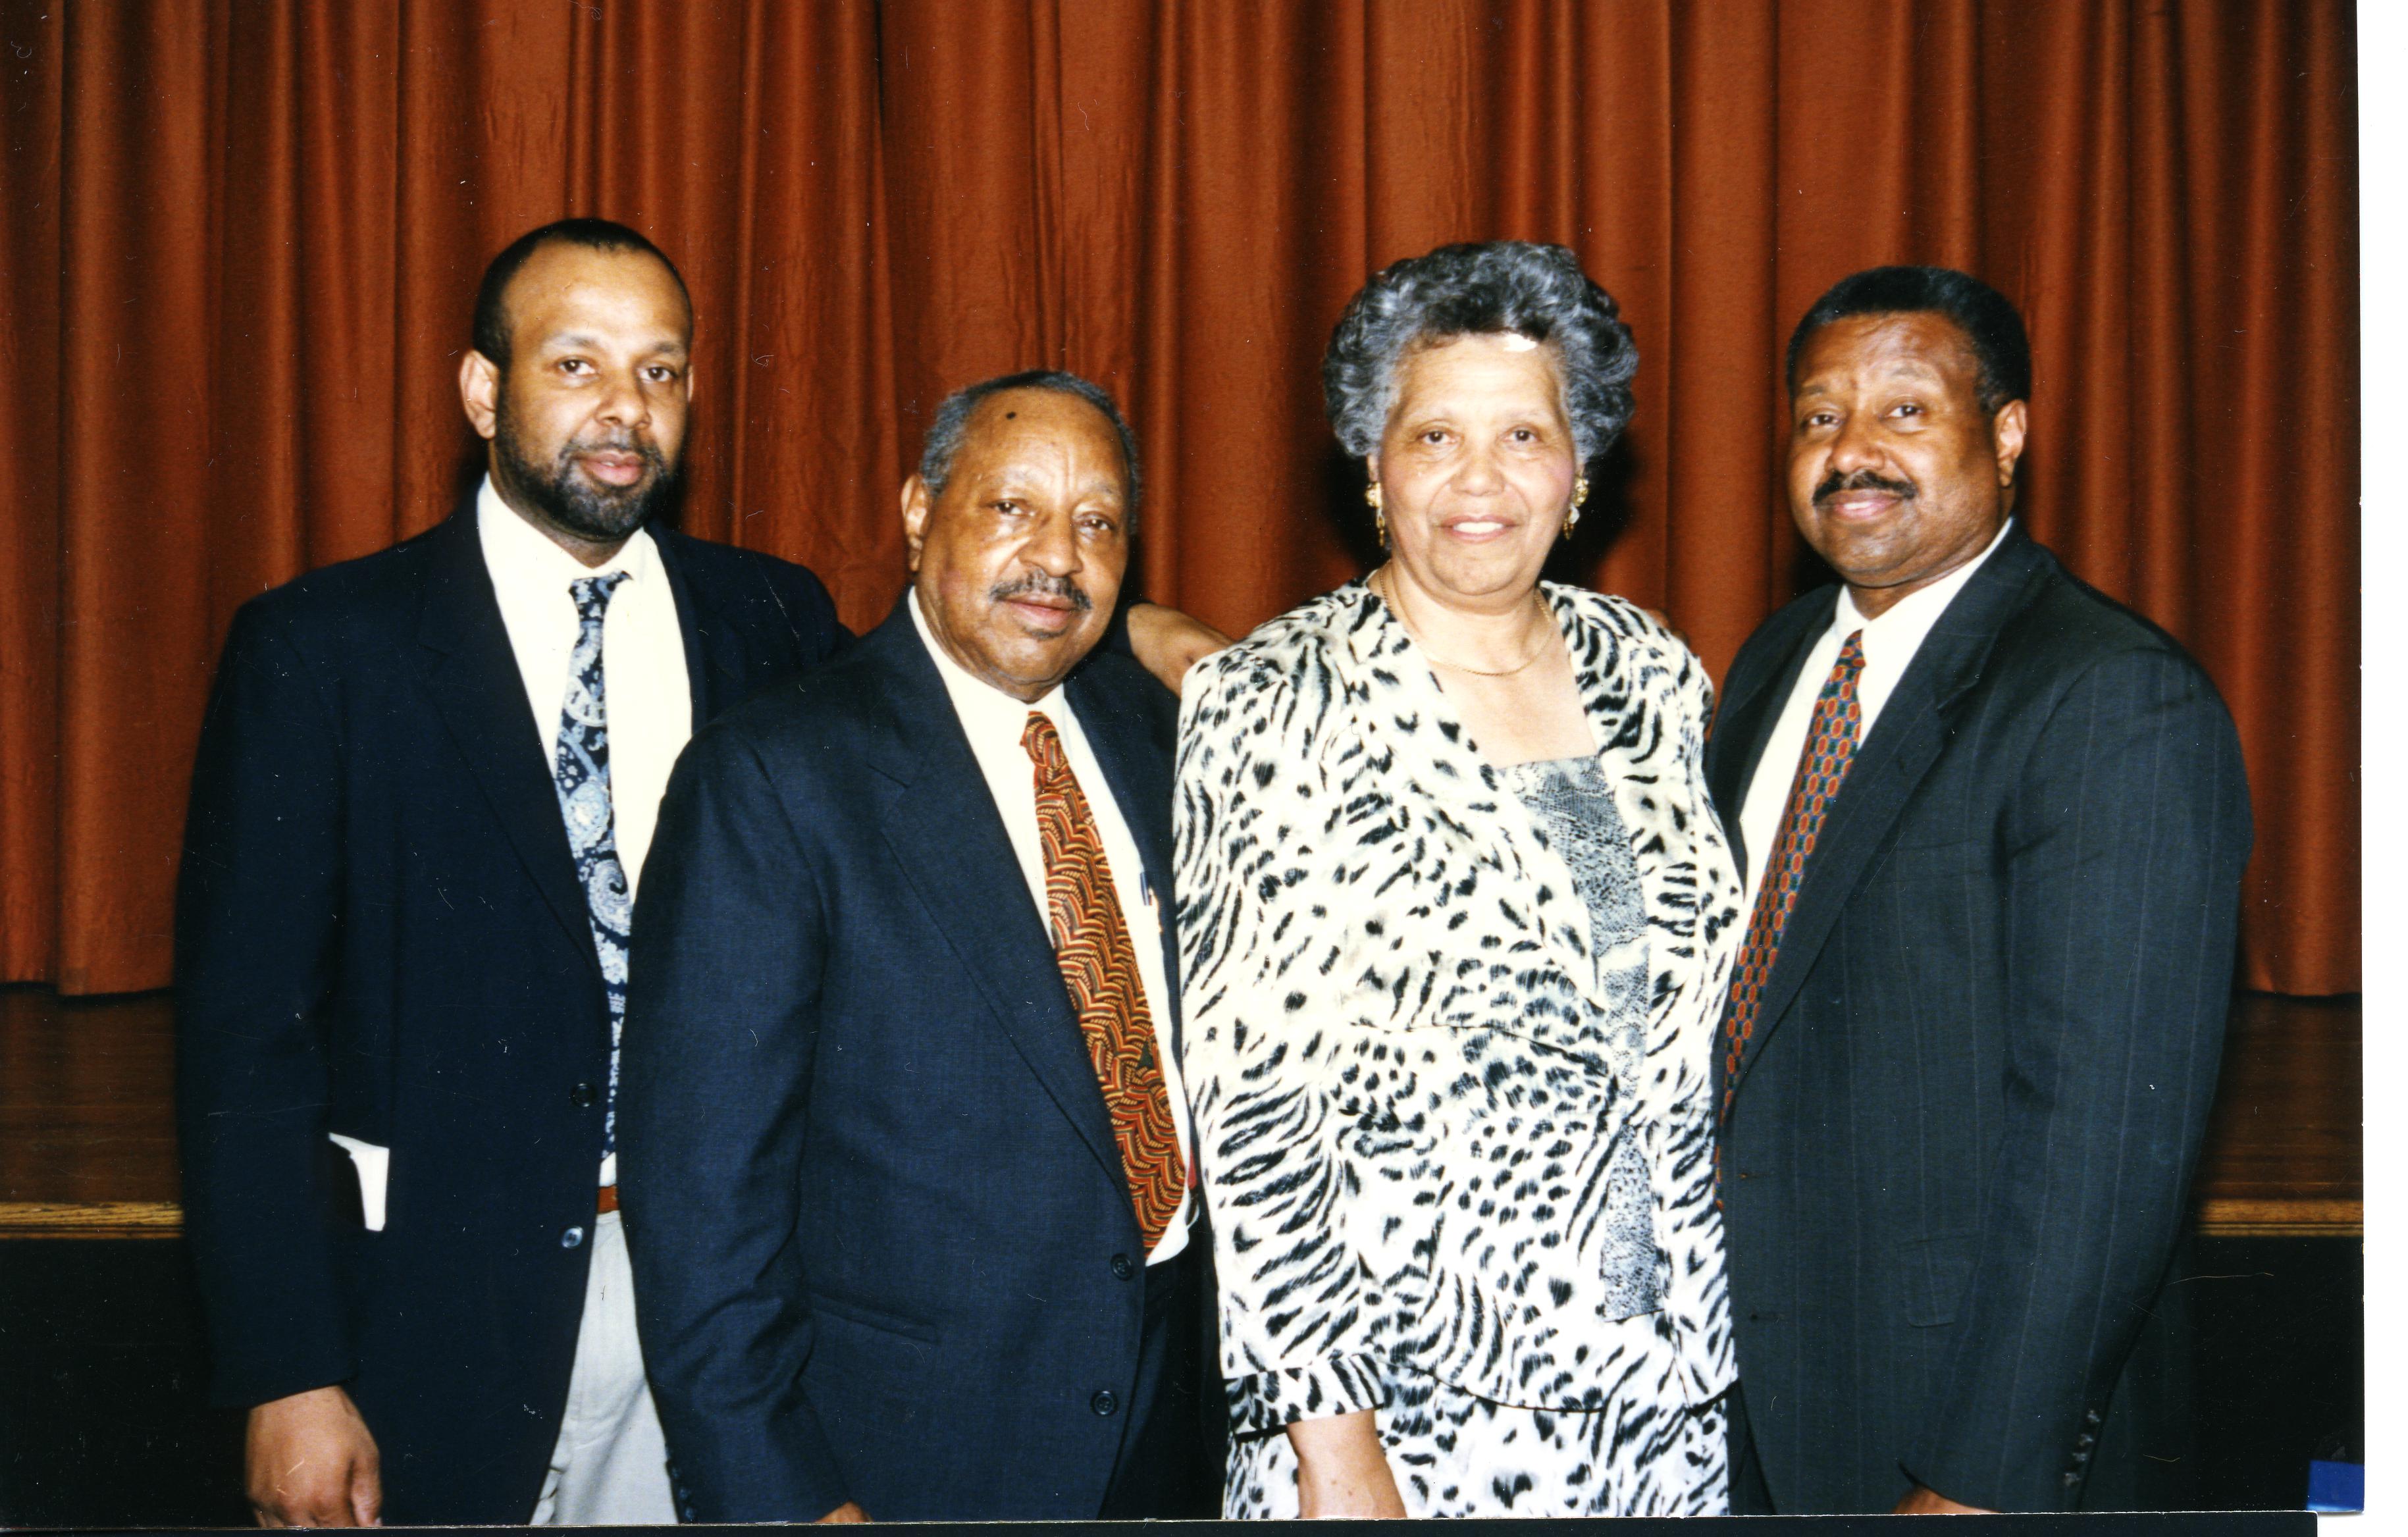 Dervey and Thelma Lomax with their sons Elston and Gregory